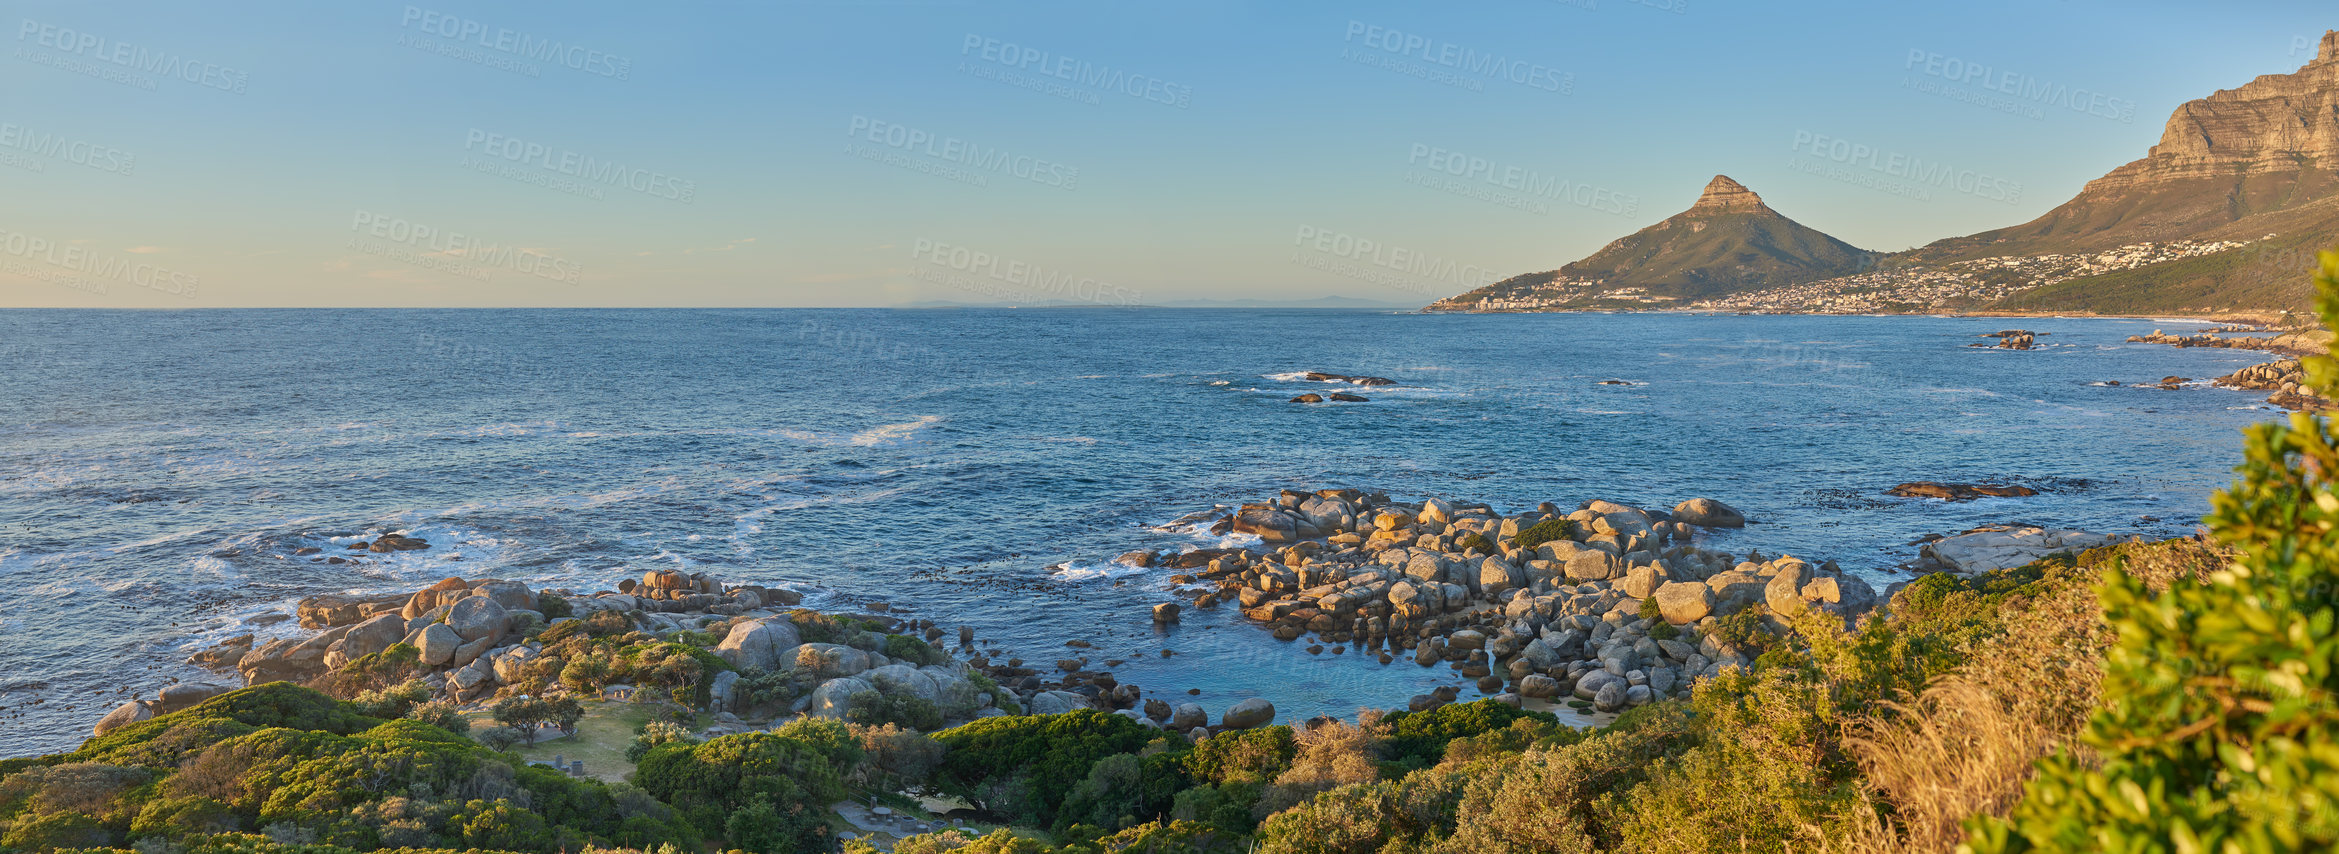 Buy stock photo Beautiful landscape view of Lions Head, Table Mountain National Park, Cape Town, South Africa. Panorama of seascape with mountains and lush green nature. Scenic view of the sea or ocean in summer